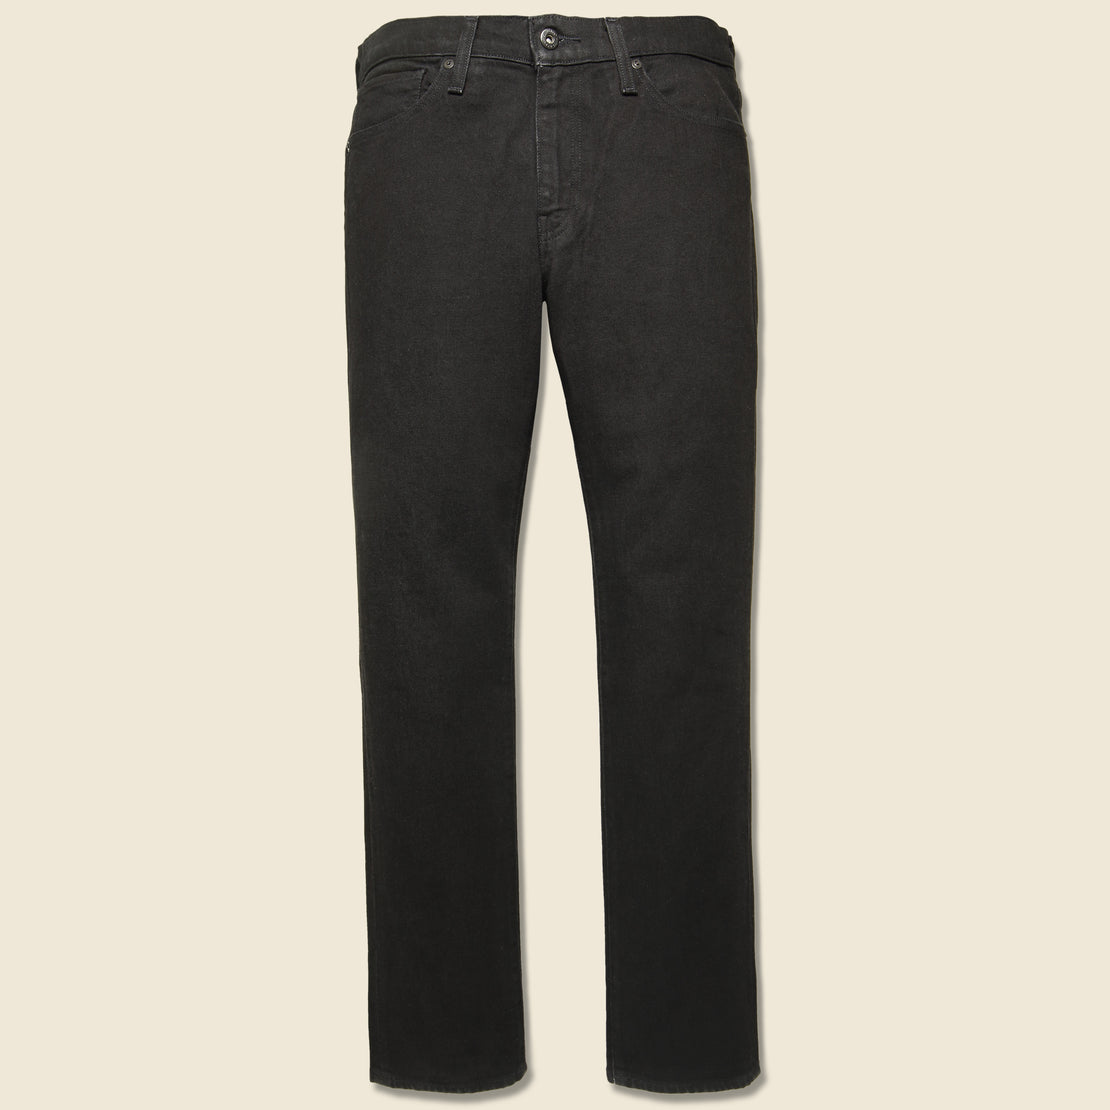 Levis Made & Crafted 511 Slim Fit Jean - Black Rinse